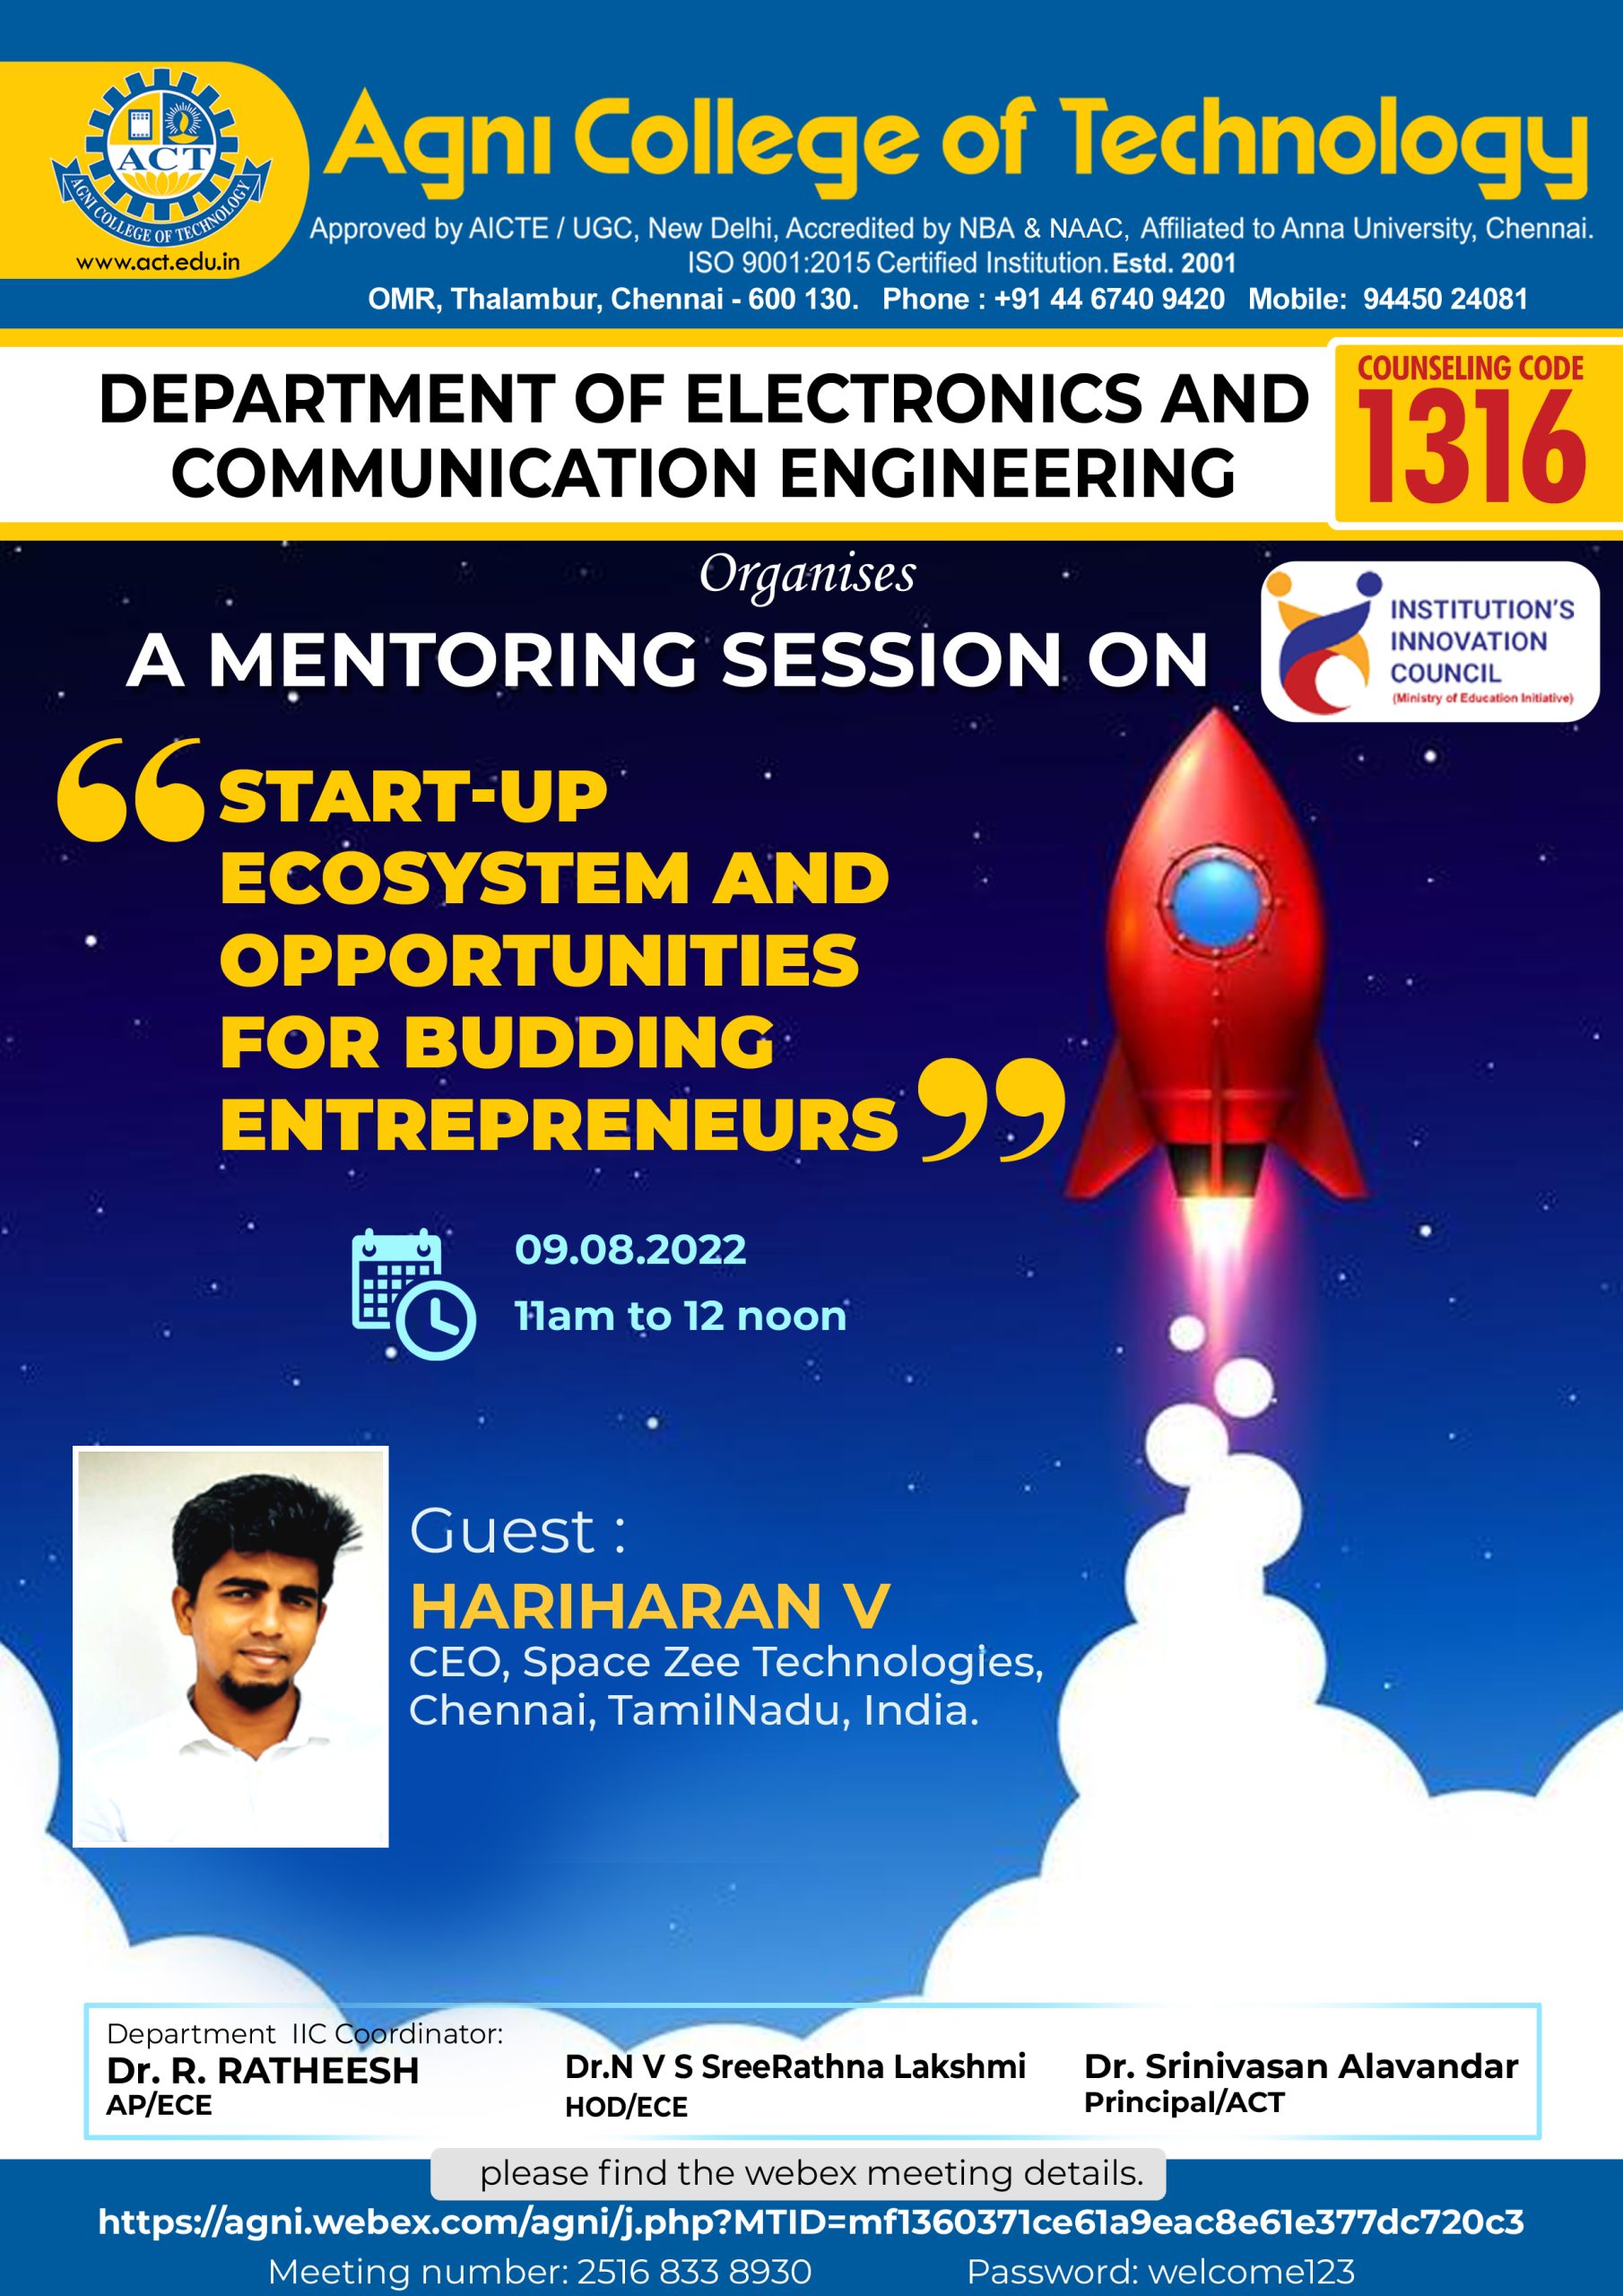 A Mentoring Session on Start-up Ecosystem and Opportunities for Budding Entrepreneurs